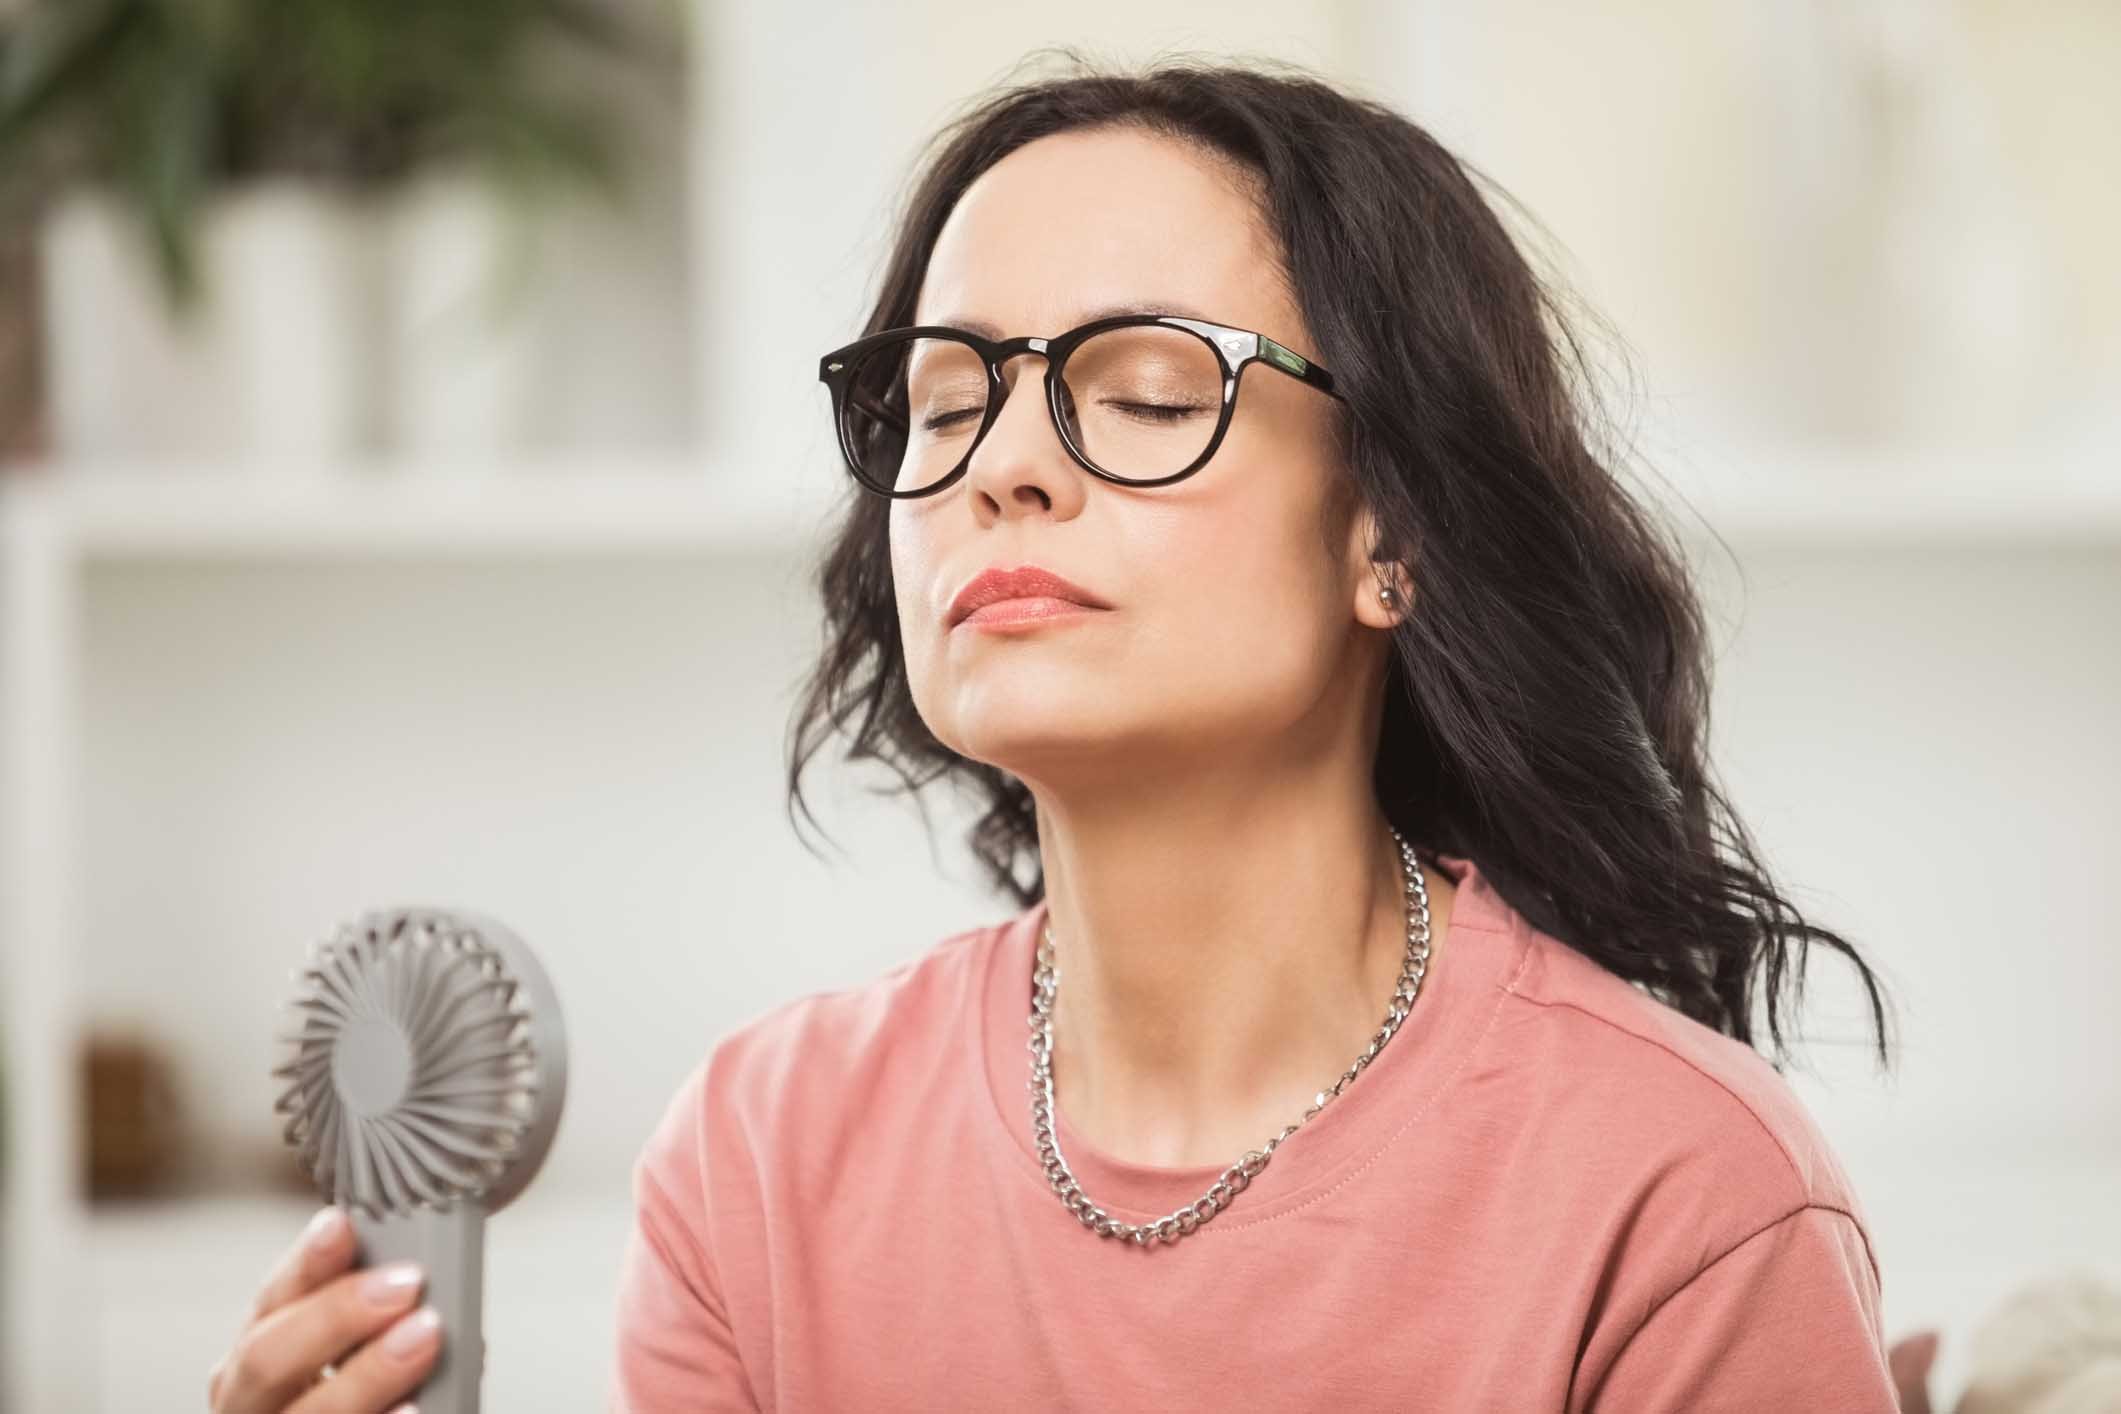 Managing Hot Flashes from a Medical Perspective